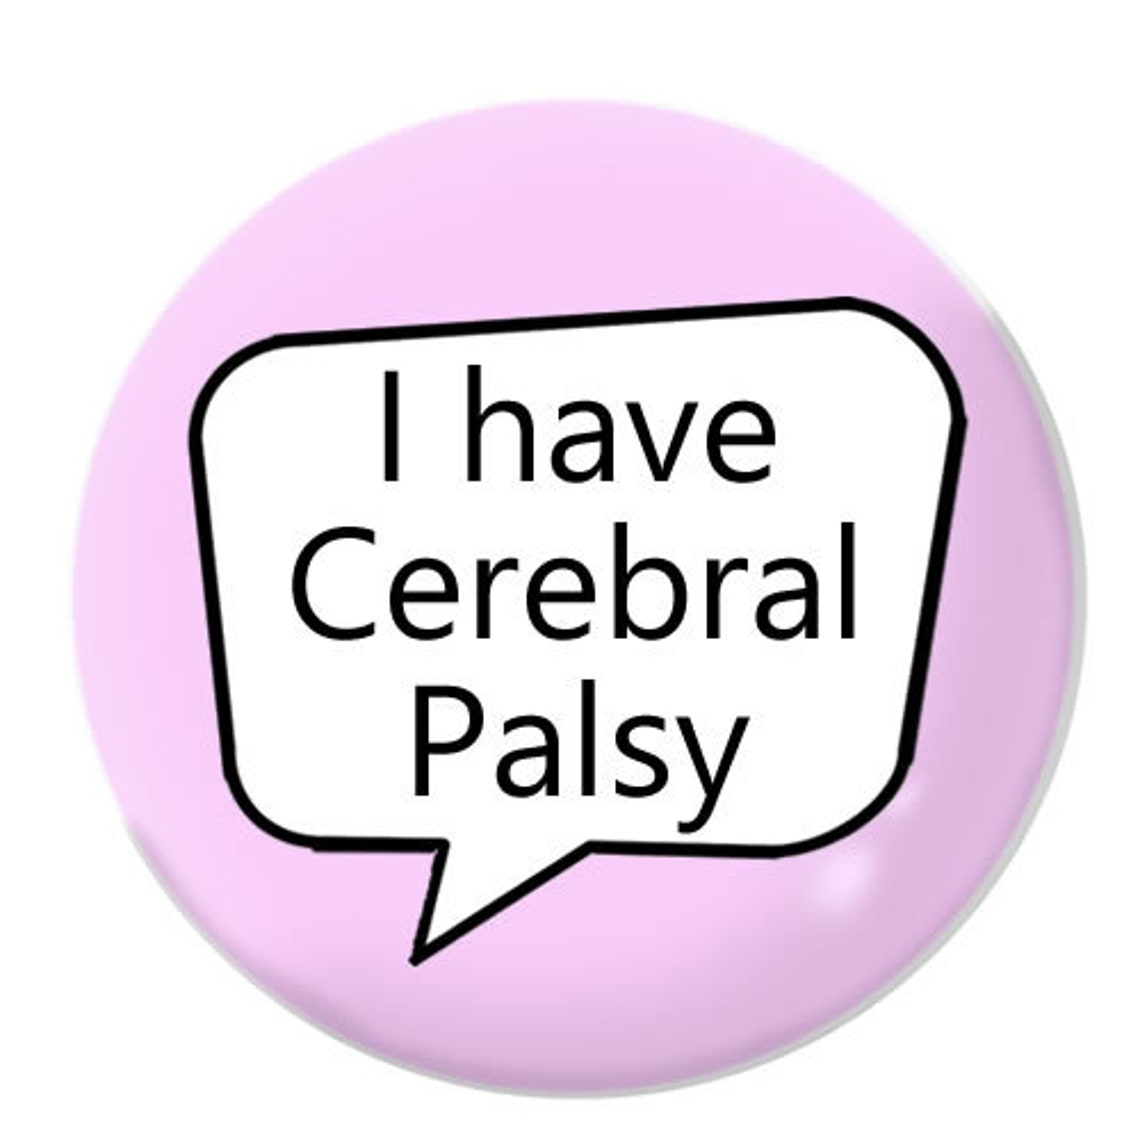 Cerebral Palsy Awareness Badge 25mm 1 Inch Pin Button Etsy